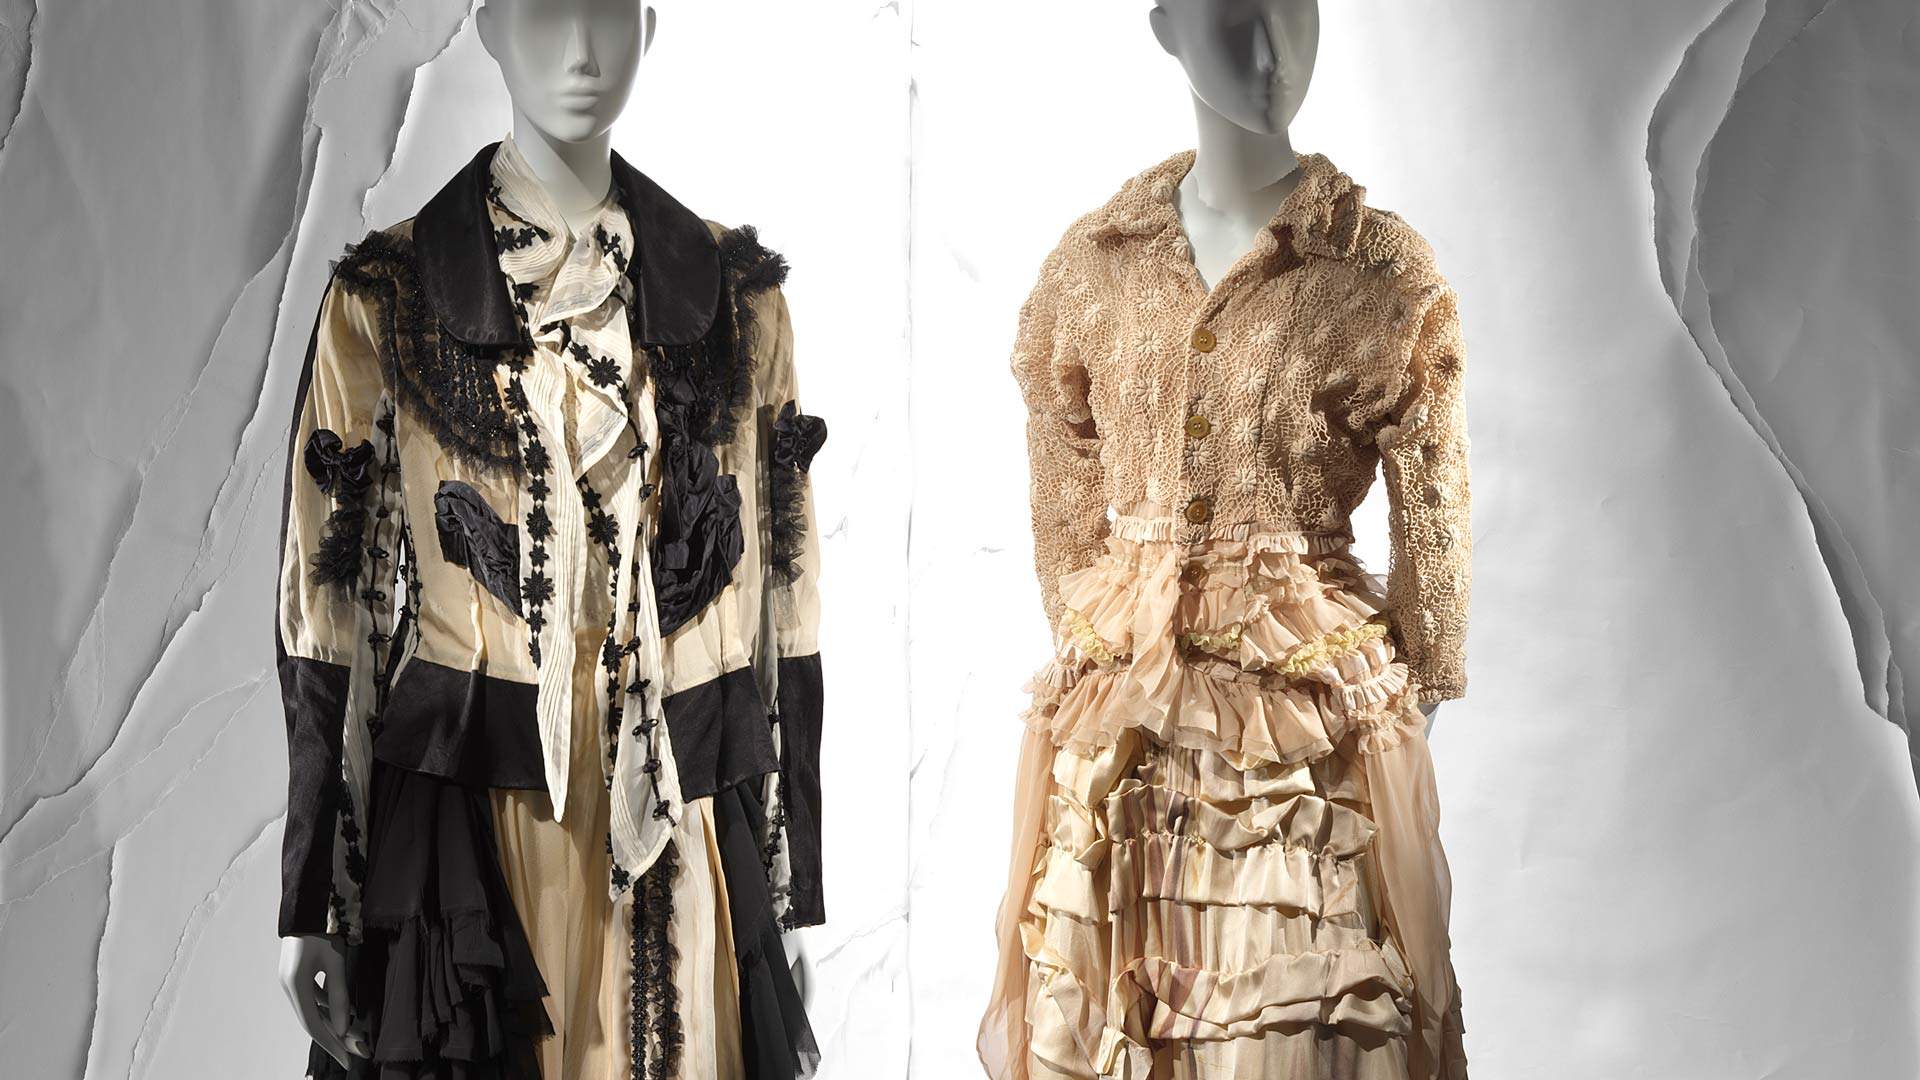 The NGV's New Free Exhibition Is Dedicated to Japanese Fashion Label Comme des Garcons